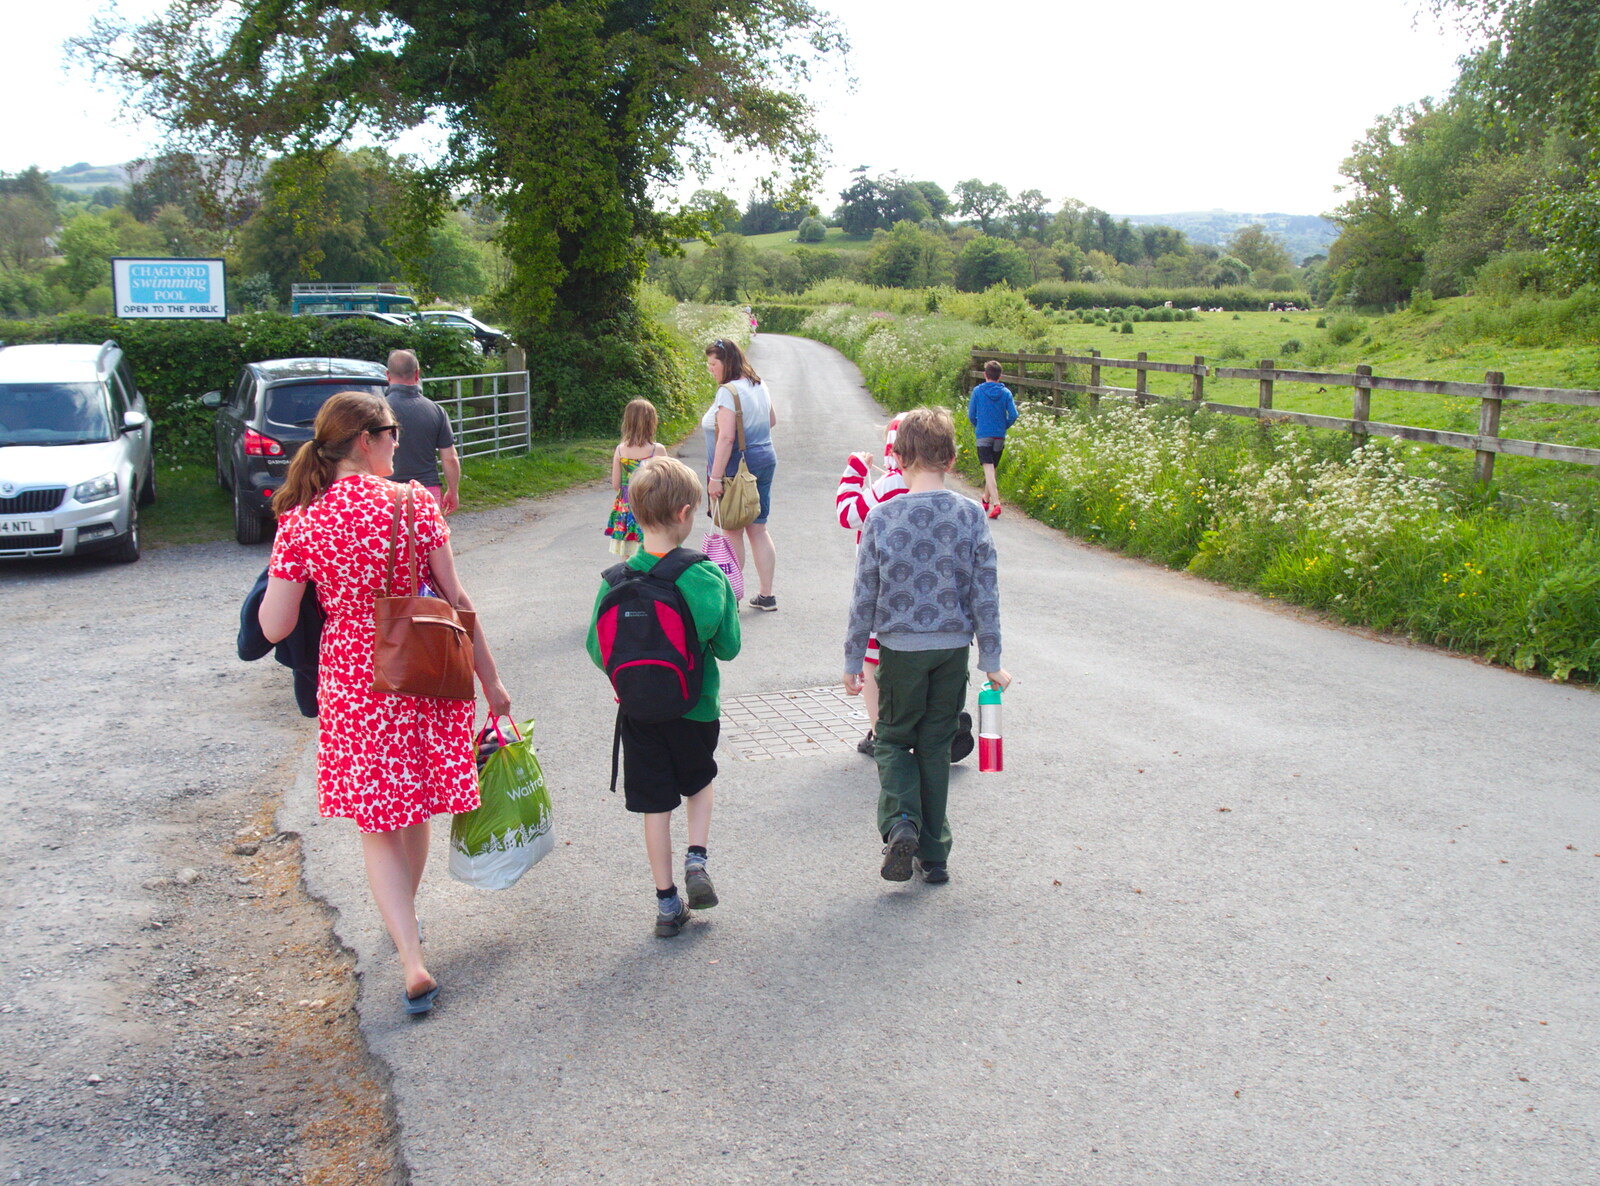 We head back to the car park from Chagford Lido and a Trip to Parke, Bovey Tracey, Devon - 25th May 2019